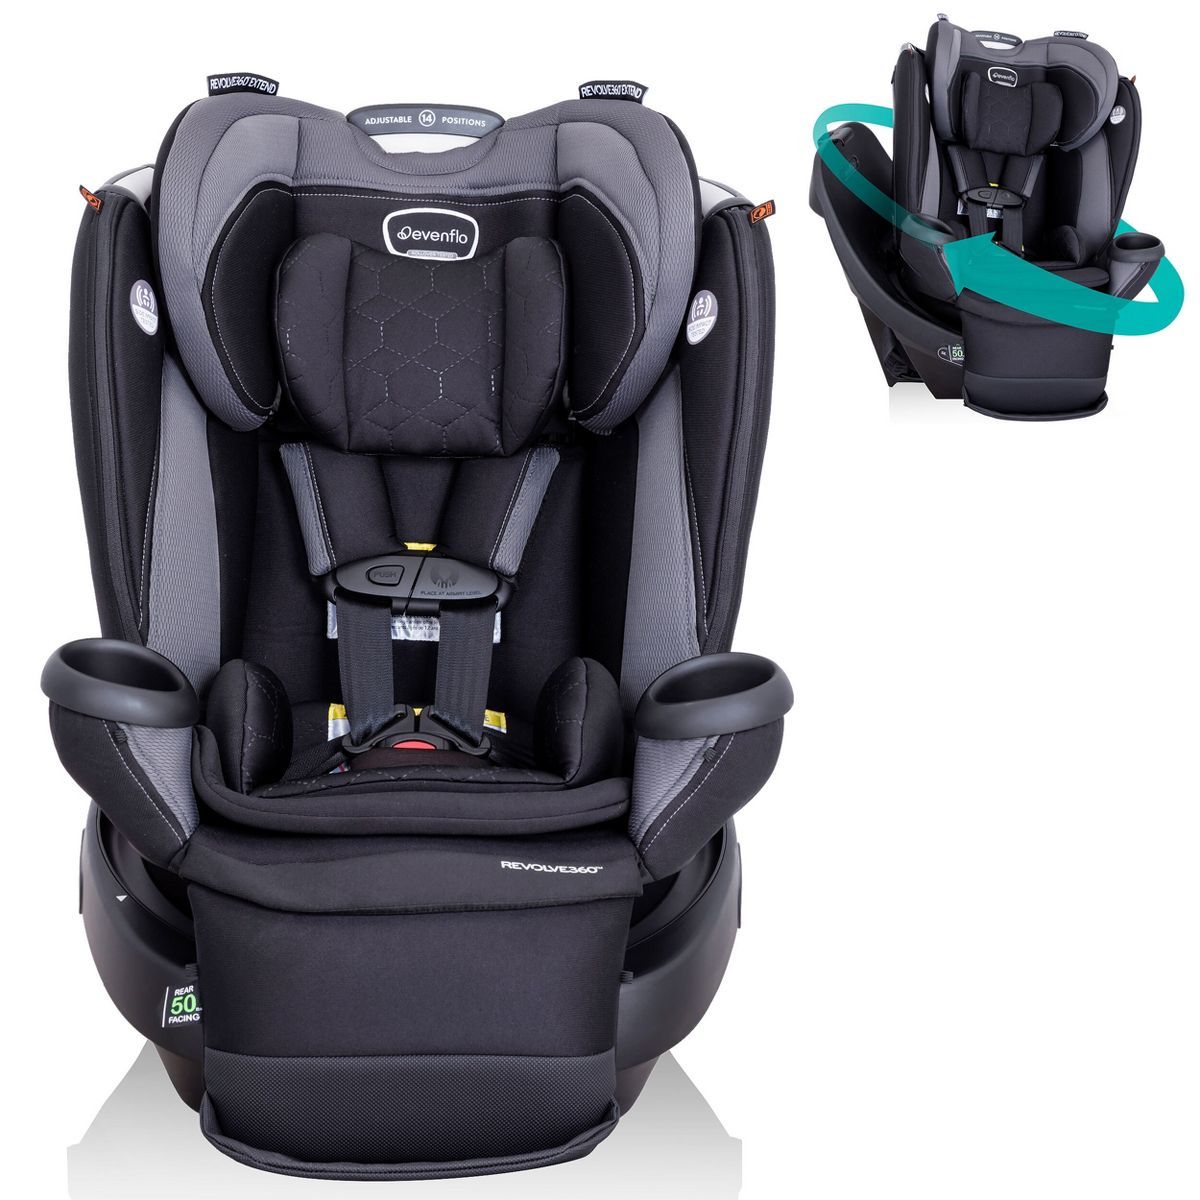 Evenflo Revolve 360 Extend All-in-One Rotating Convertible Car Seat with Quick Clean Cover | Target